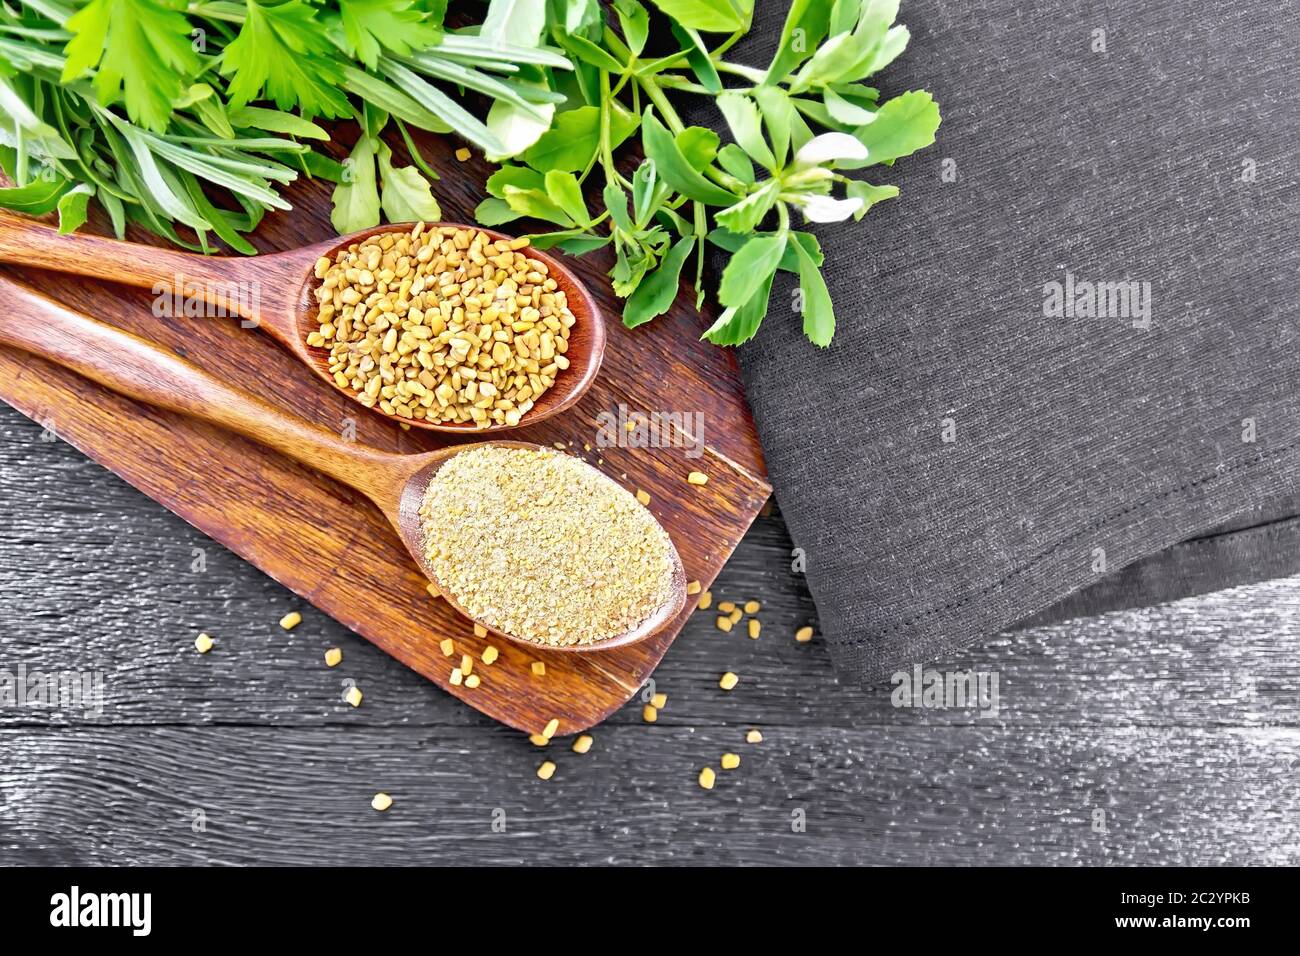 Fenugreek seeds and ground spice in two spoons on brown plate with herbs, a napkin on wooden board background from above Stock Photo